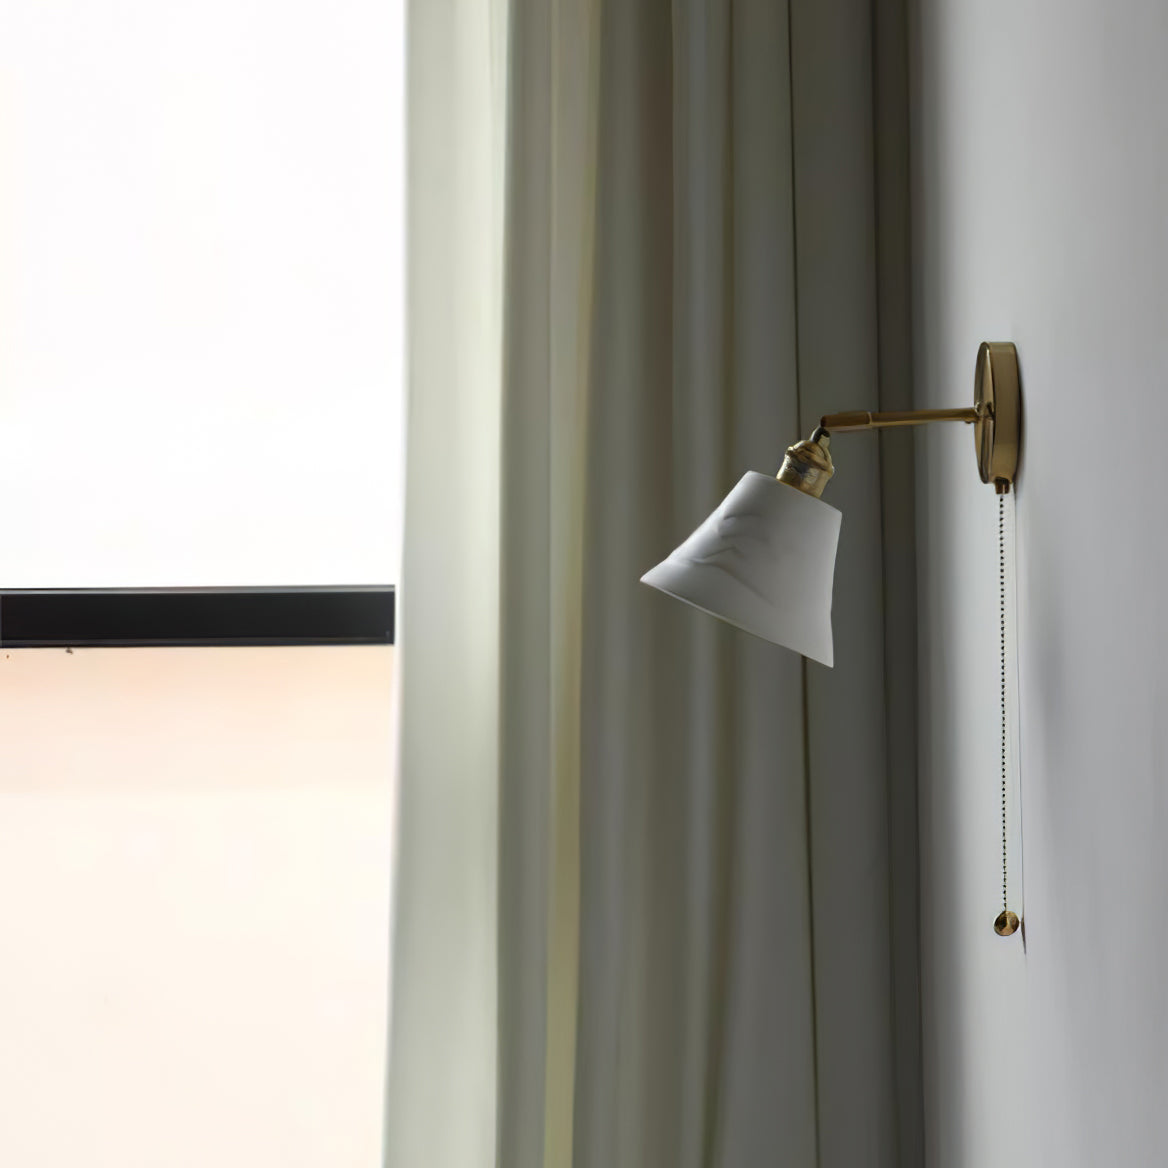 Conical Ceramic Wall Light